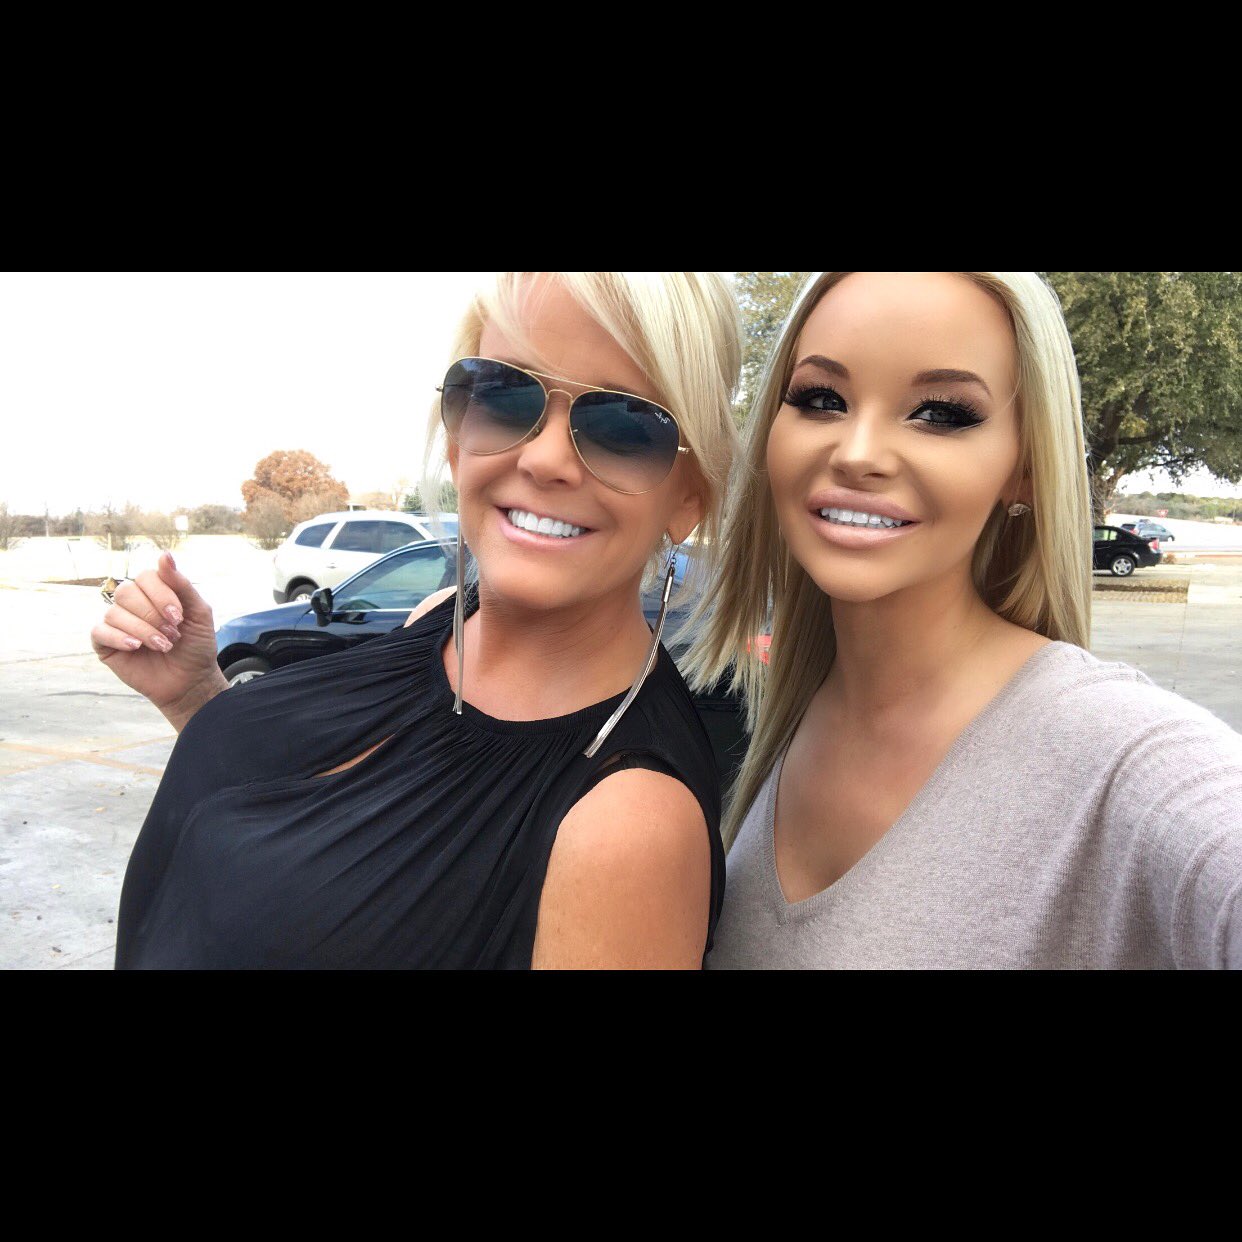 Bimbo Mom And Daughter Guess They Using Too Much Makeup Scrolller